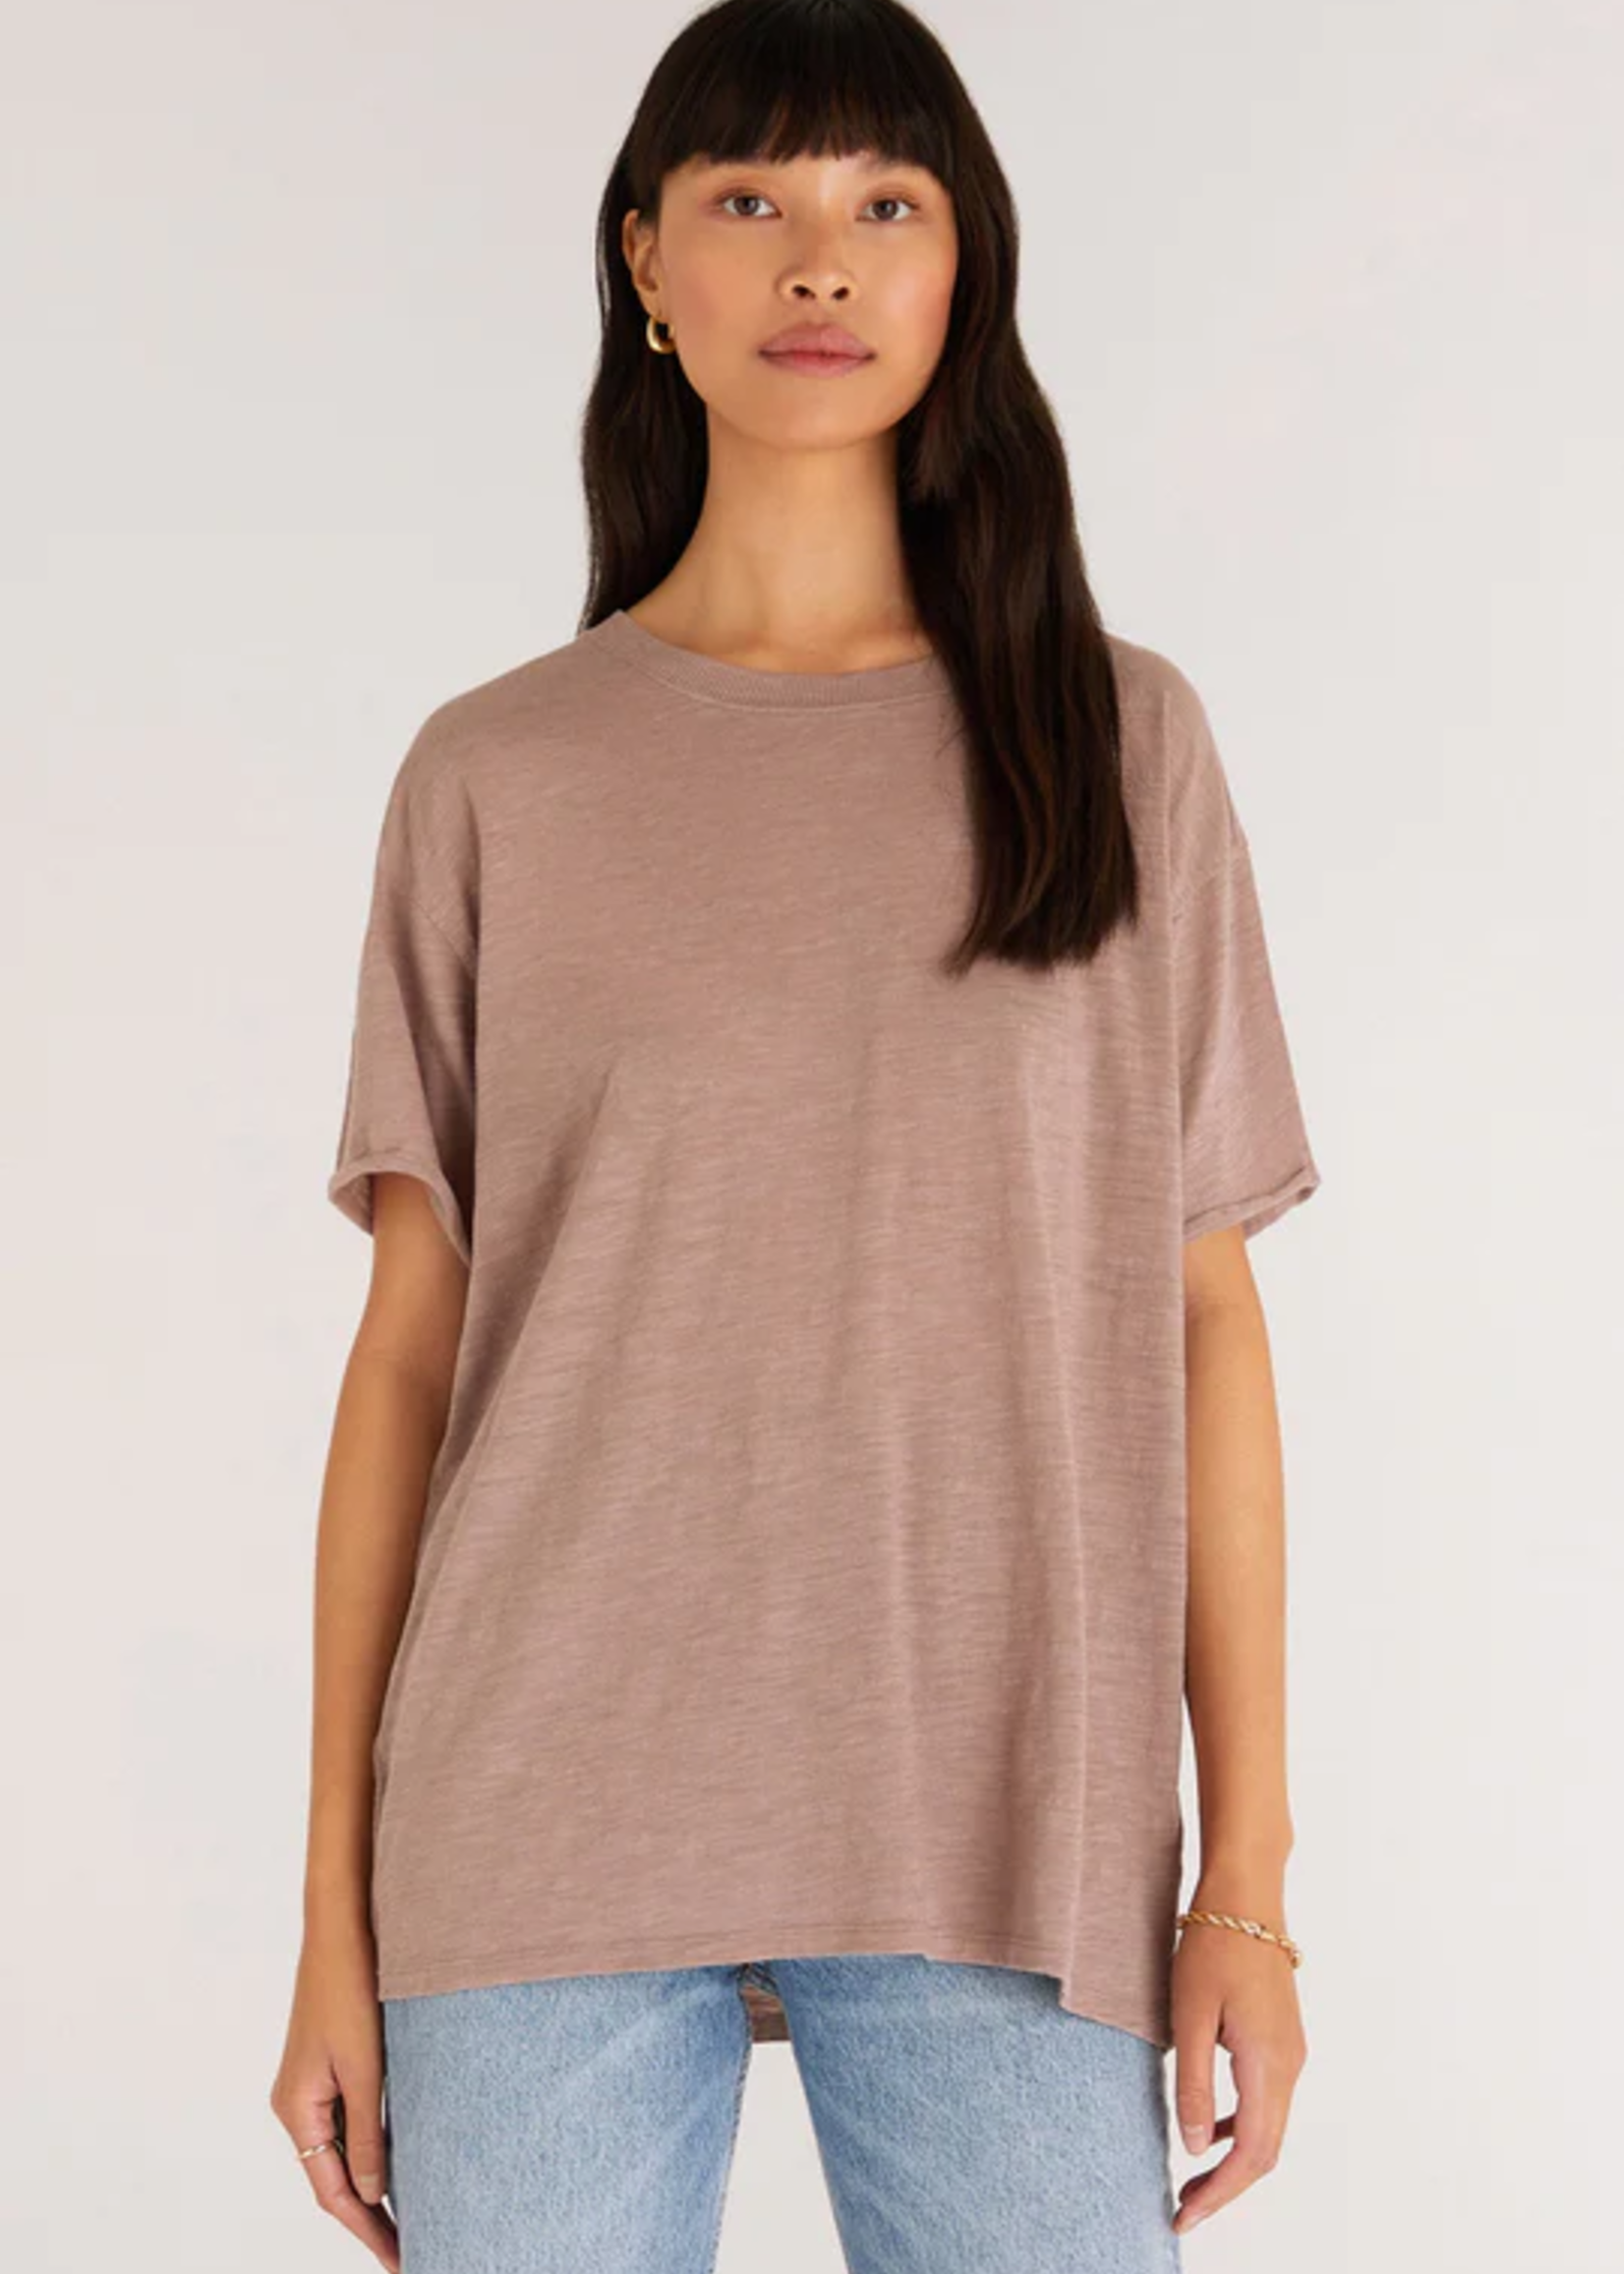 Z SUPPLY The Oversized Tee